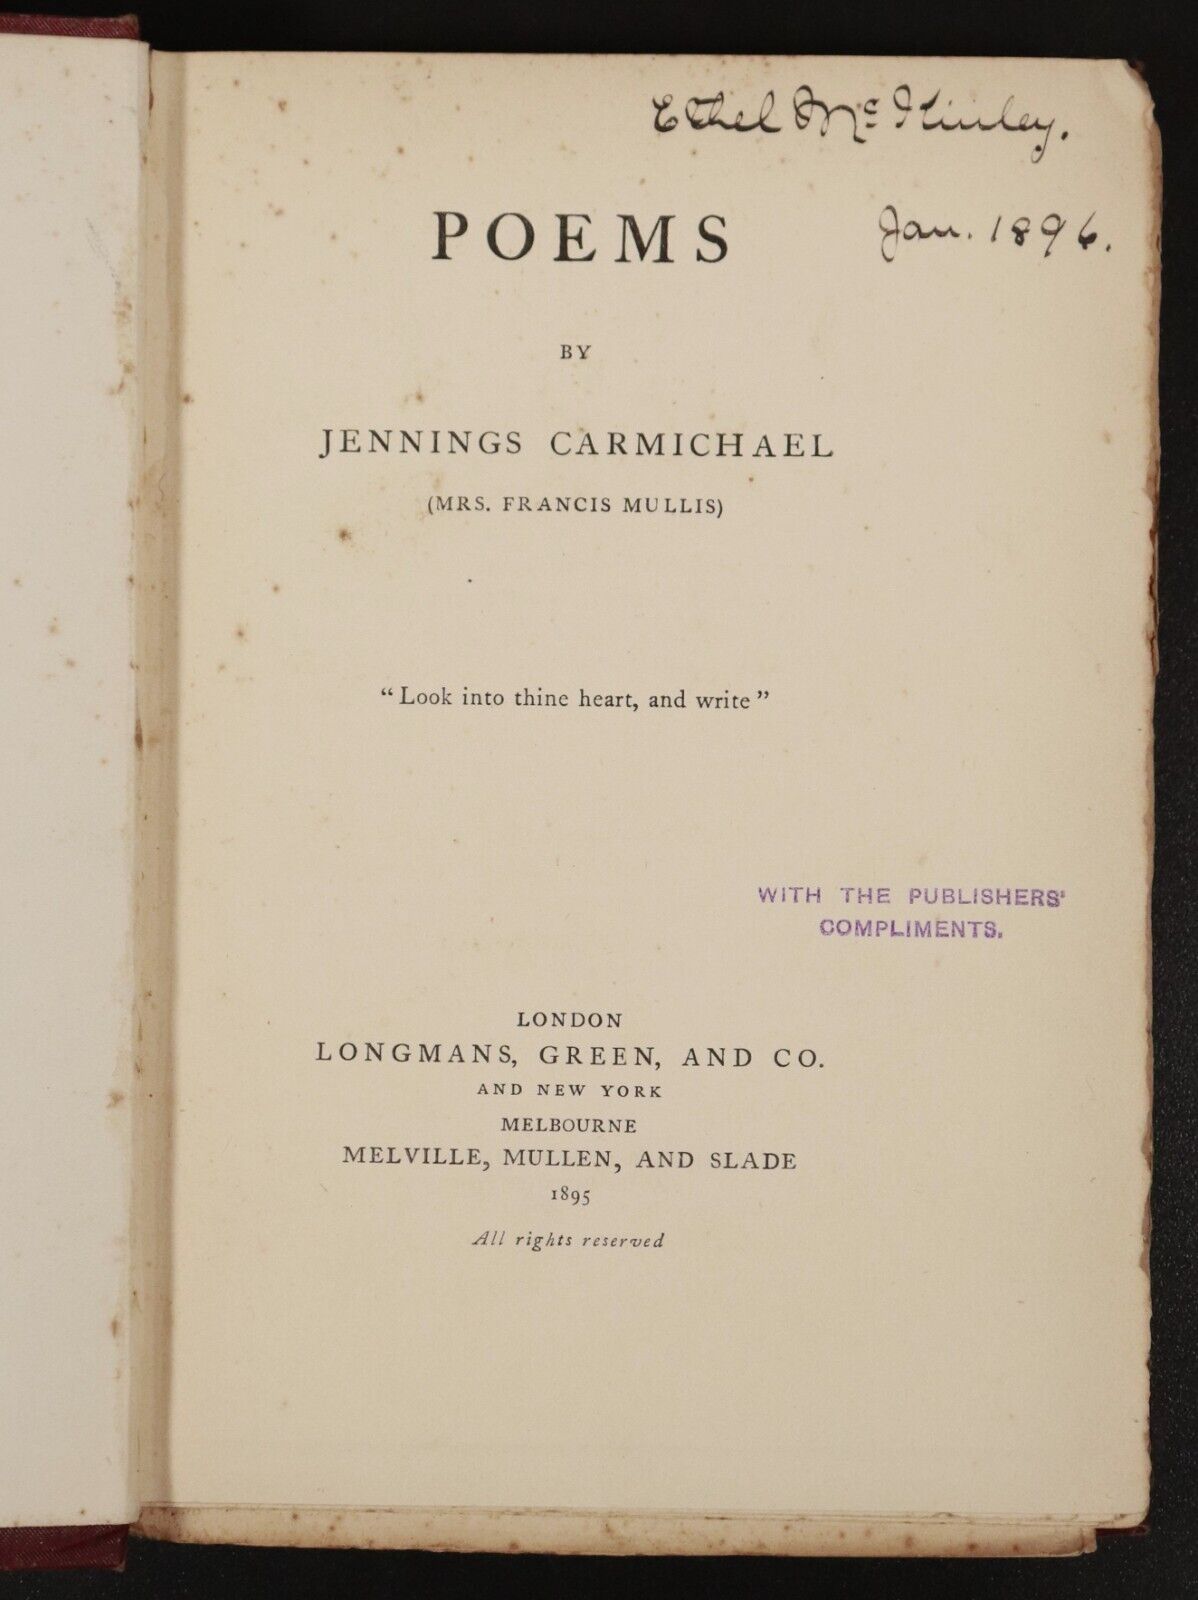 1895 Poems by Jennings Carmichael Antique Australian Poetry Book 1st Edition - 0